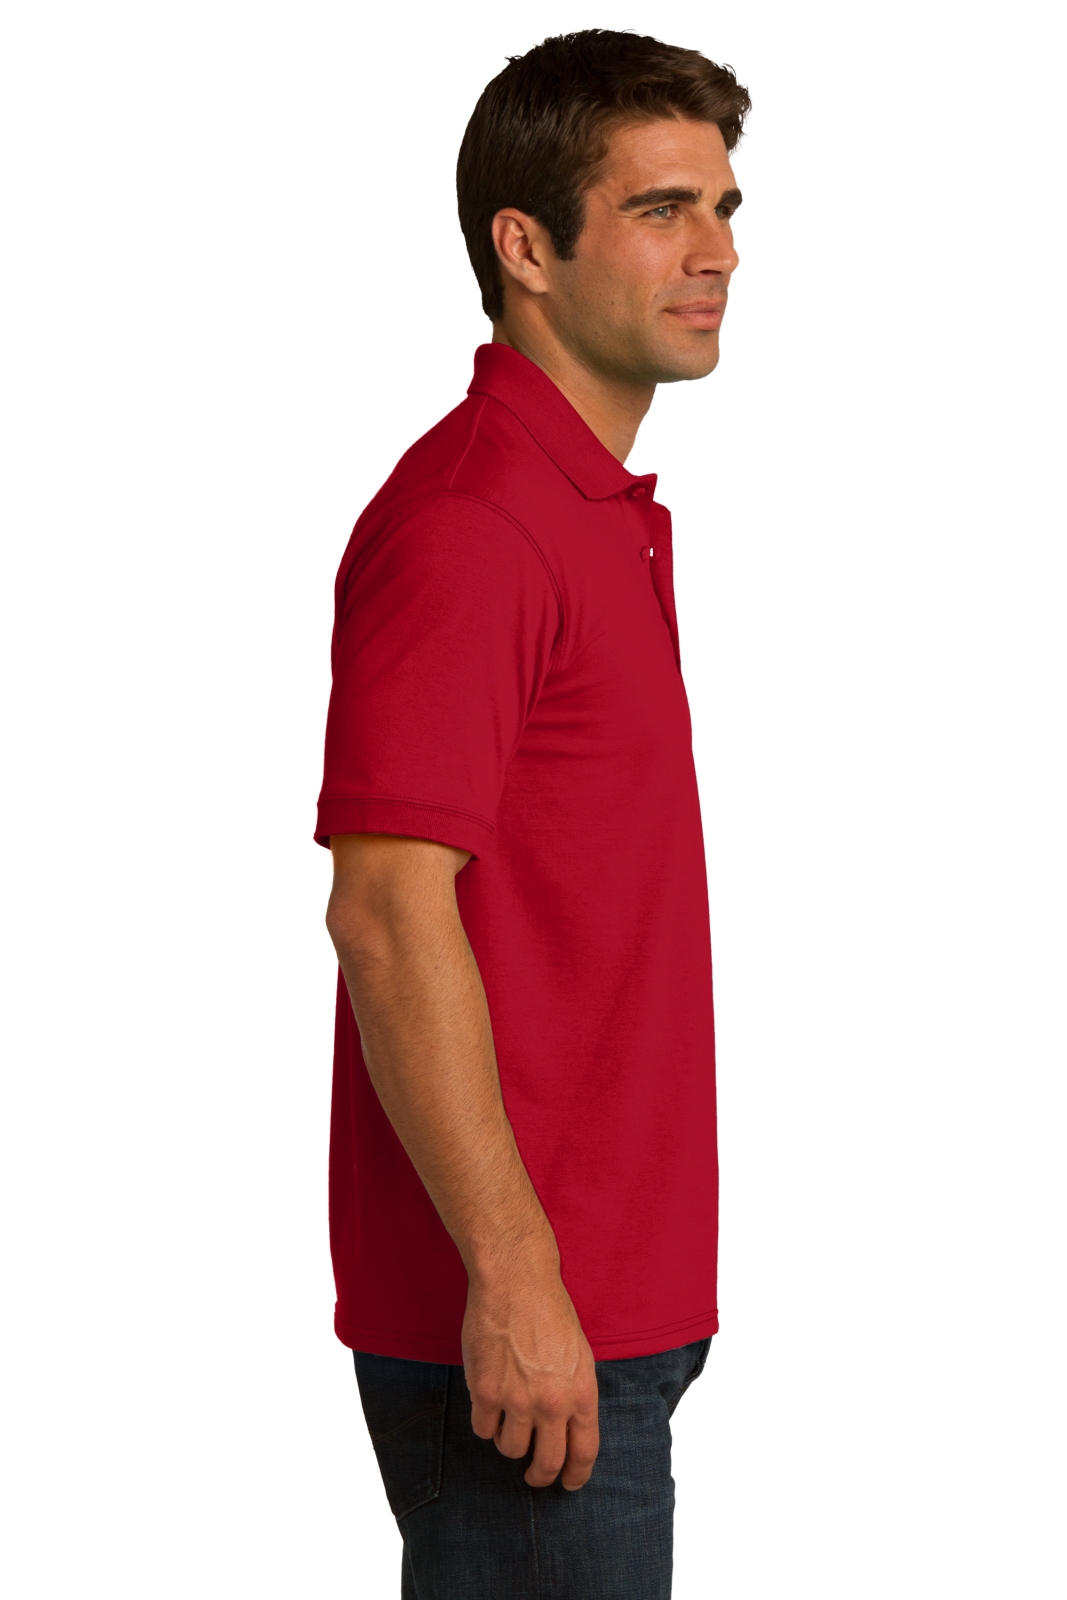 Port & Company Men's KP55T Golf Shirt Tall 5.5-Ounce Jersey Knit Polo - image 2 of 3